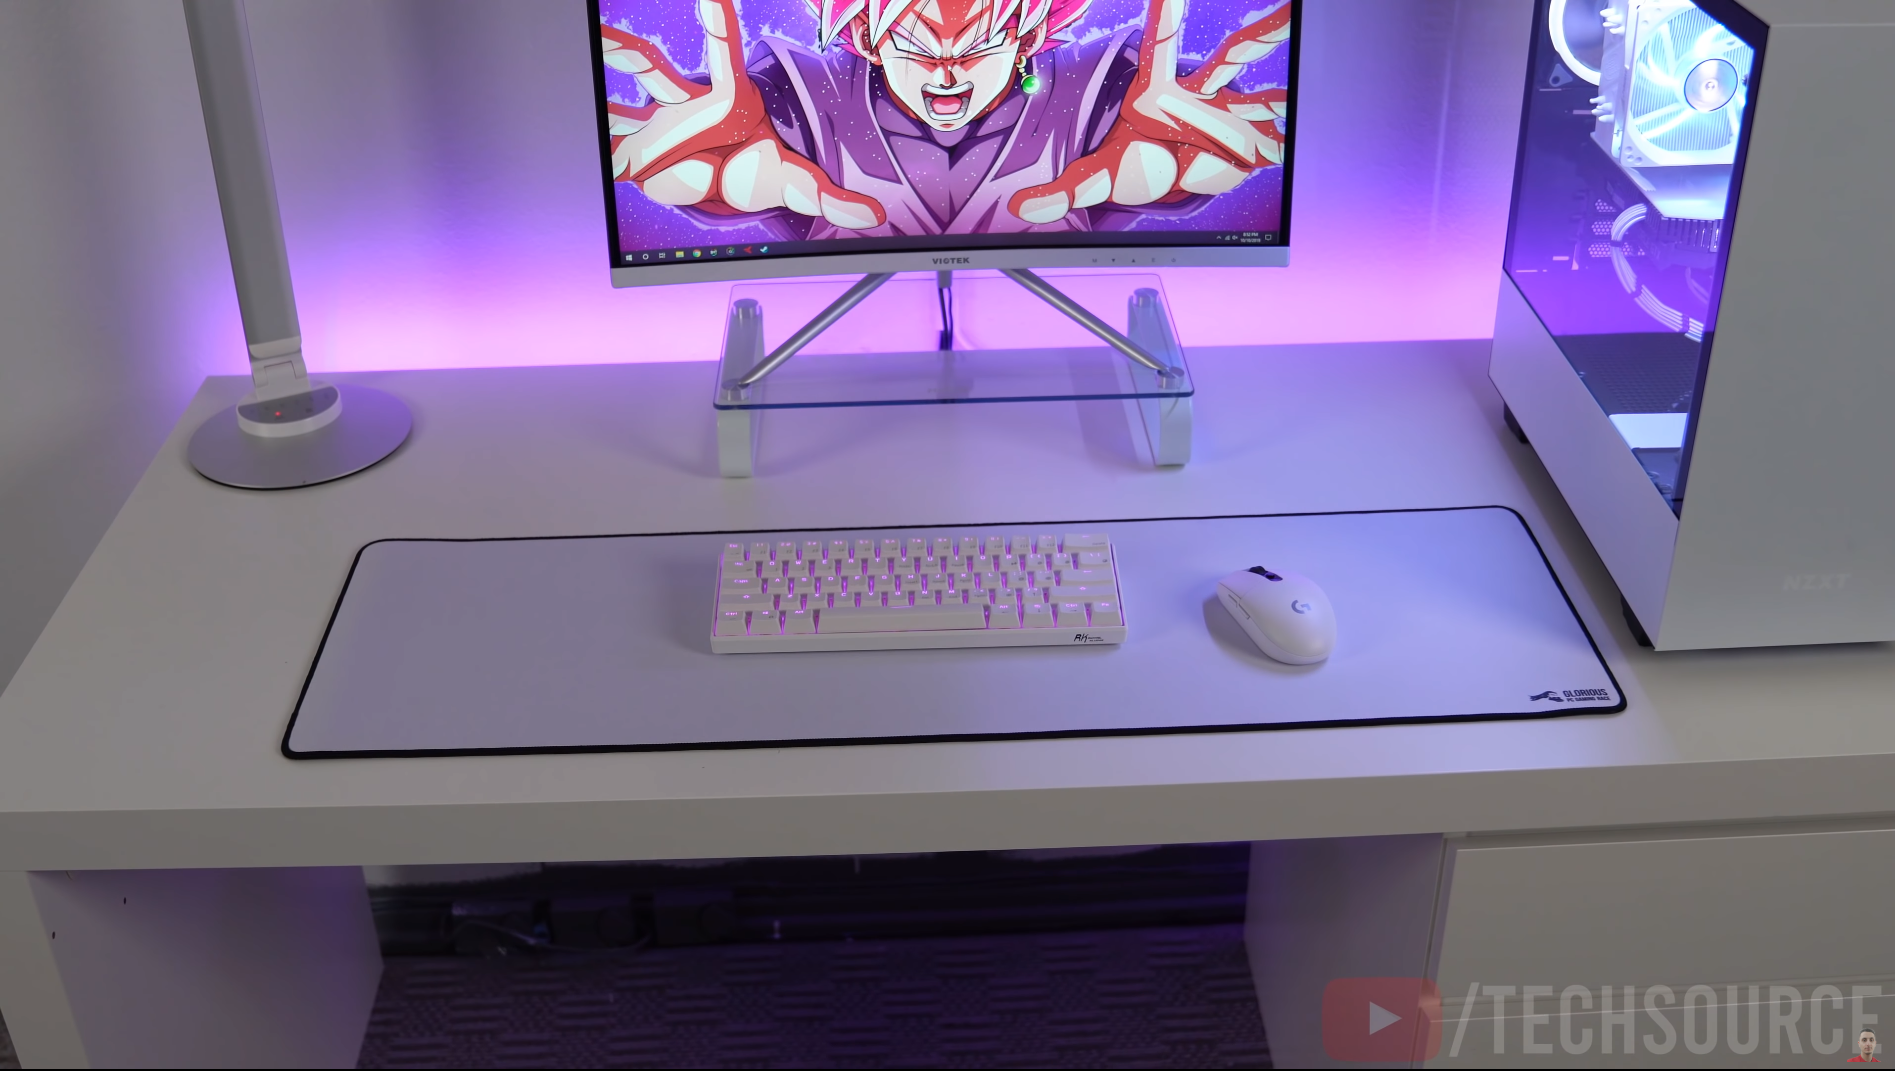 Featured image of post Weeb Gaming Setup jpndiazz turn on post notifications to stay updated tag someone who would like to see this